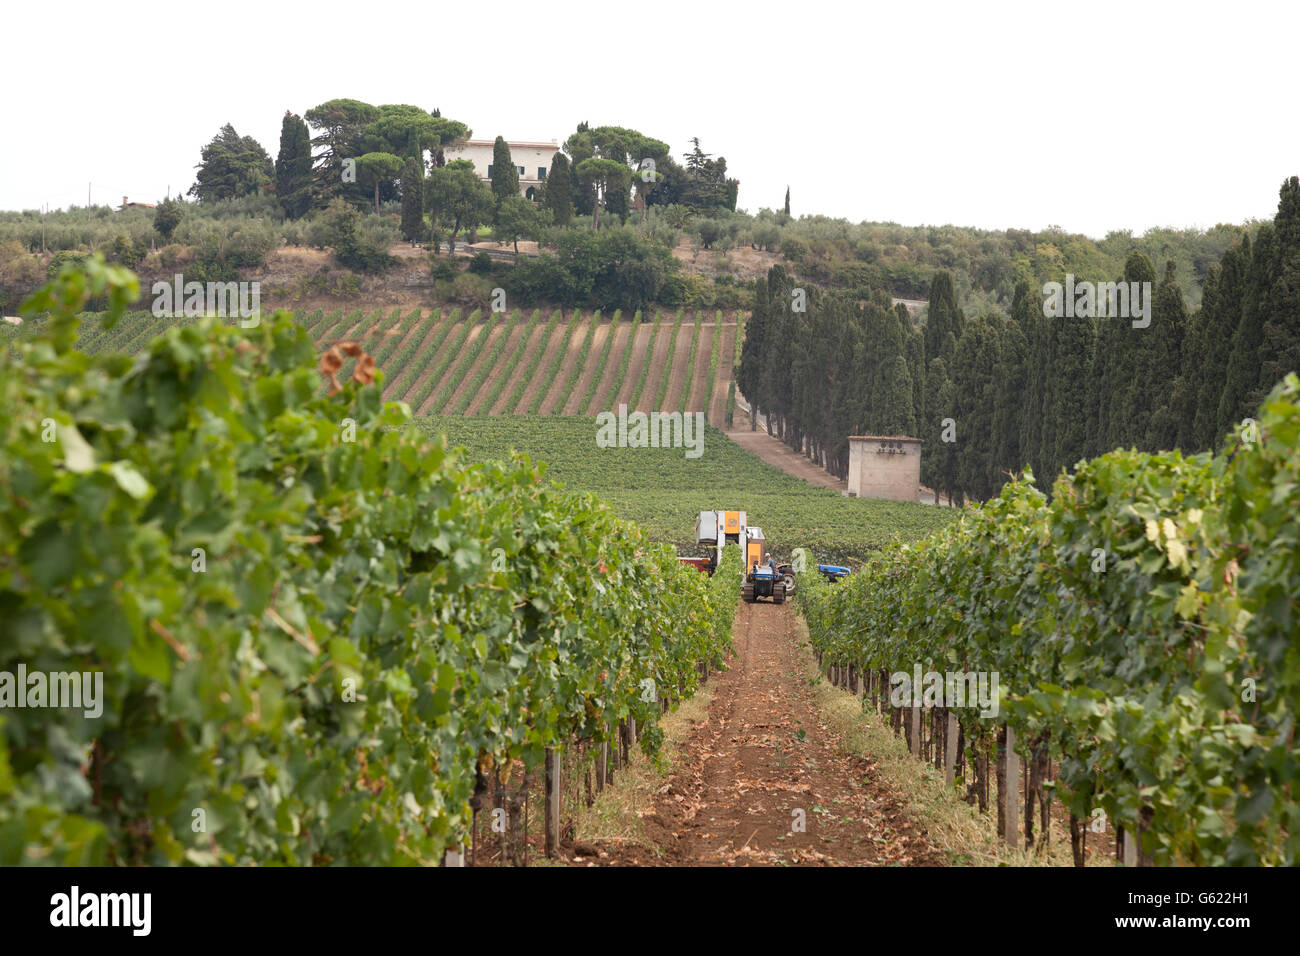 Rows of vines with a mechanical harvester in the distance harvesting grapes, in Frascati, Italy, Europe Stock Photo